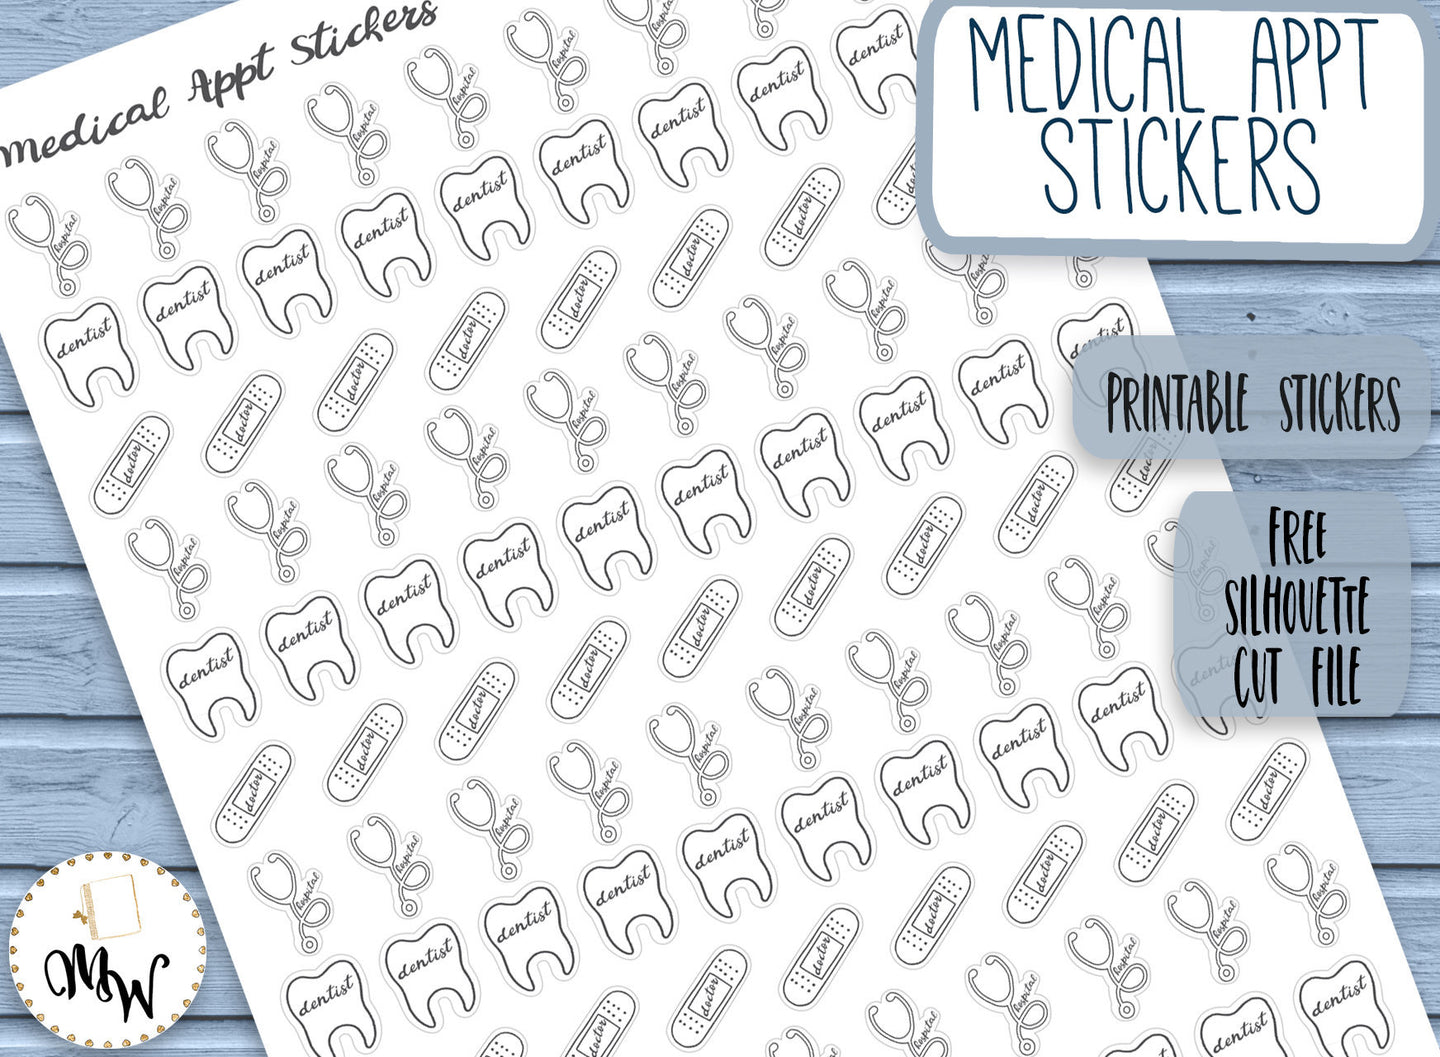 Doctor Dentist Hospital Stickers | Medical Appt PRINTABLE Stickers | Functional Planner Stickers | Medical Reminders | Appointment Stickers